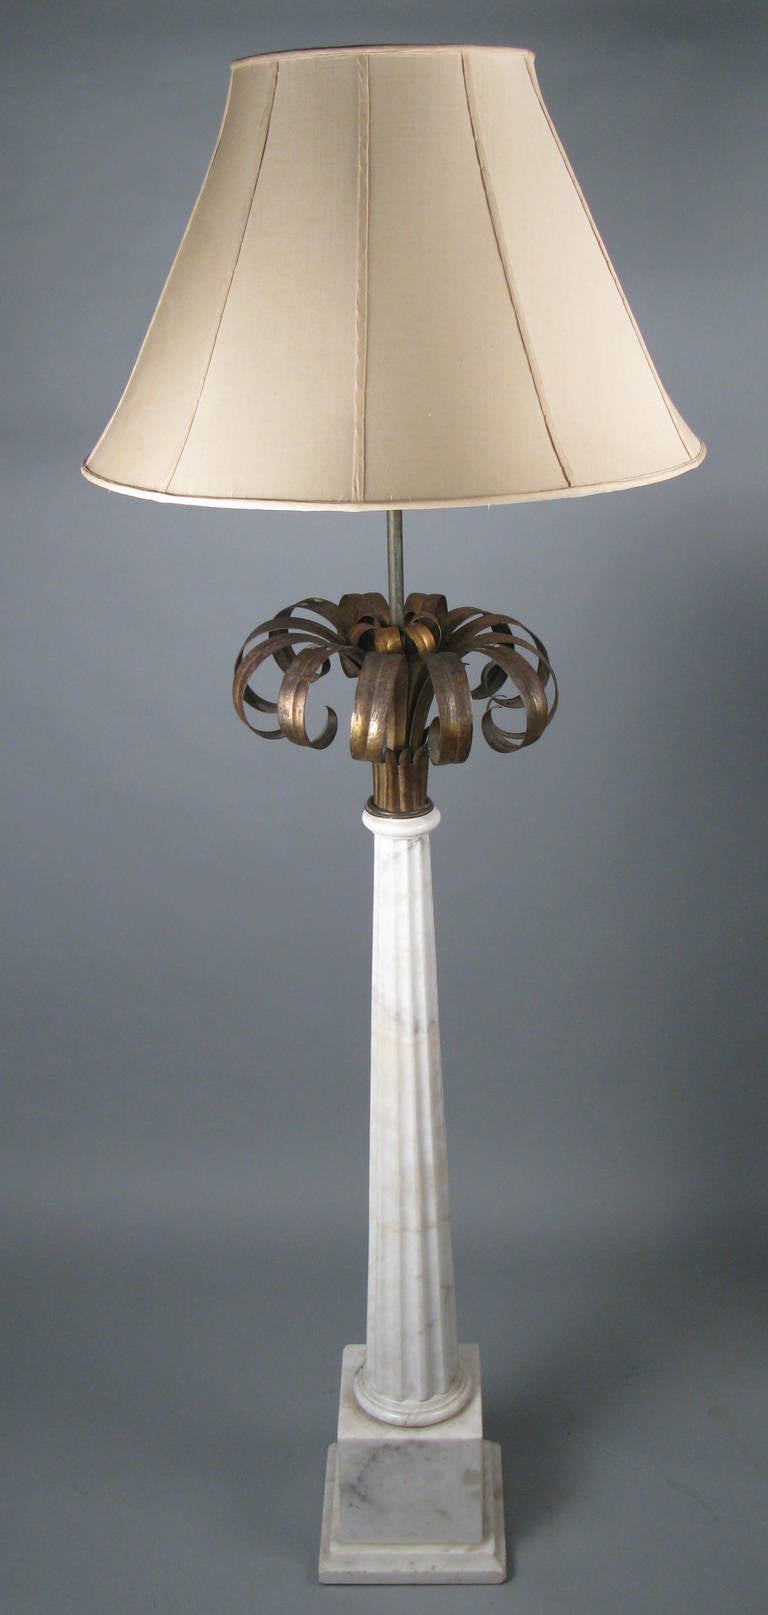 Mid-20th Century Outstanding Pair of Italian Marble and Gilded Palm Floor Lamps